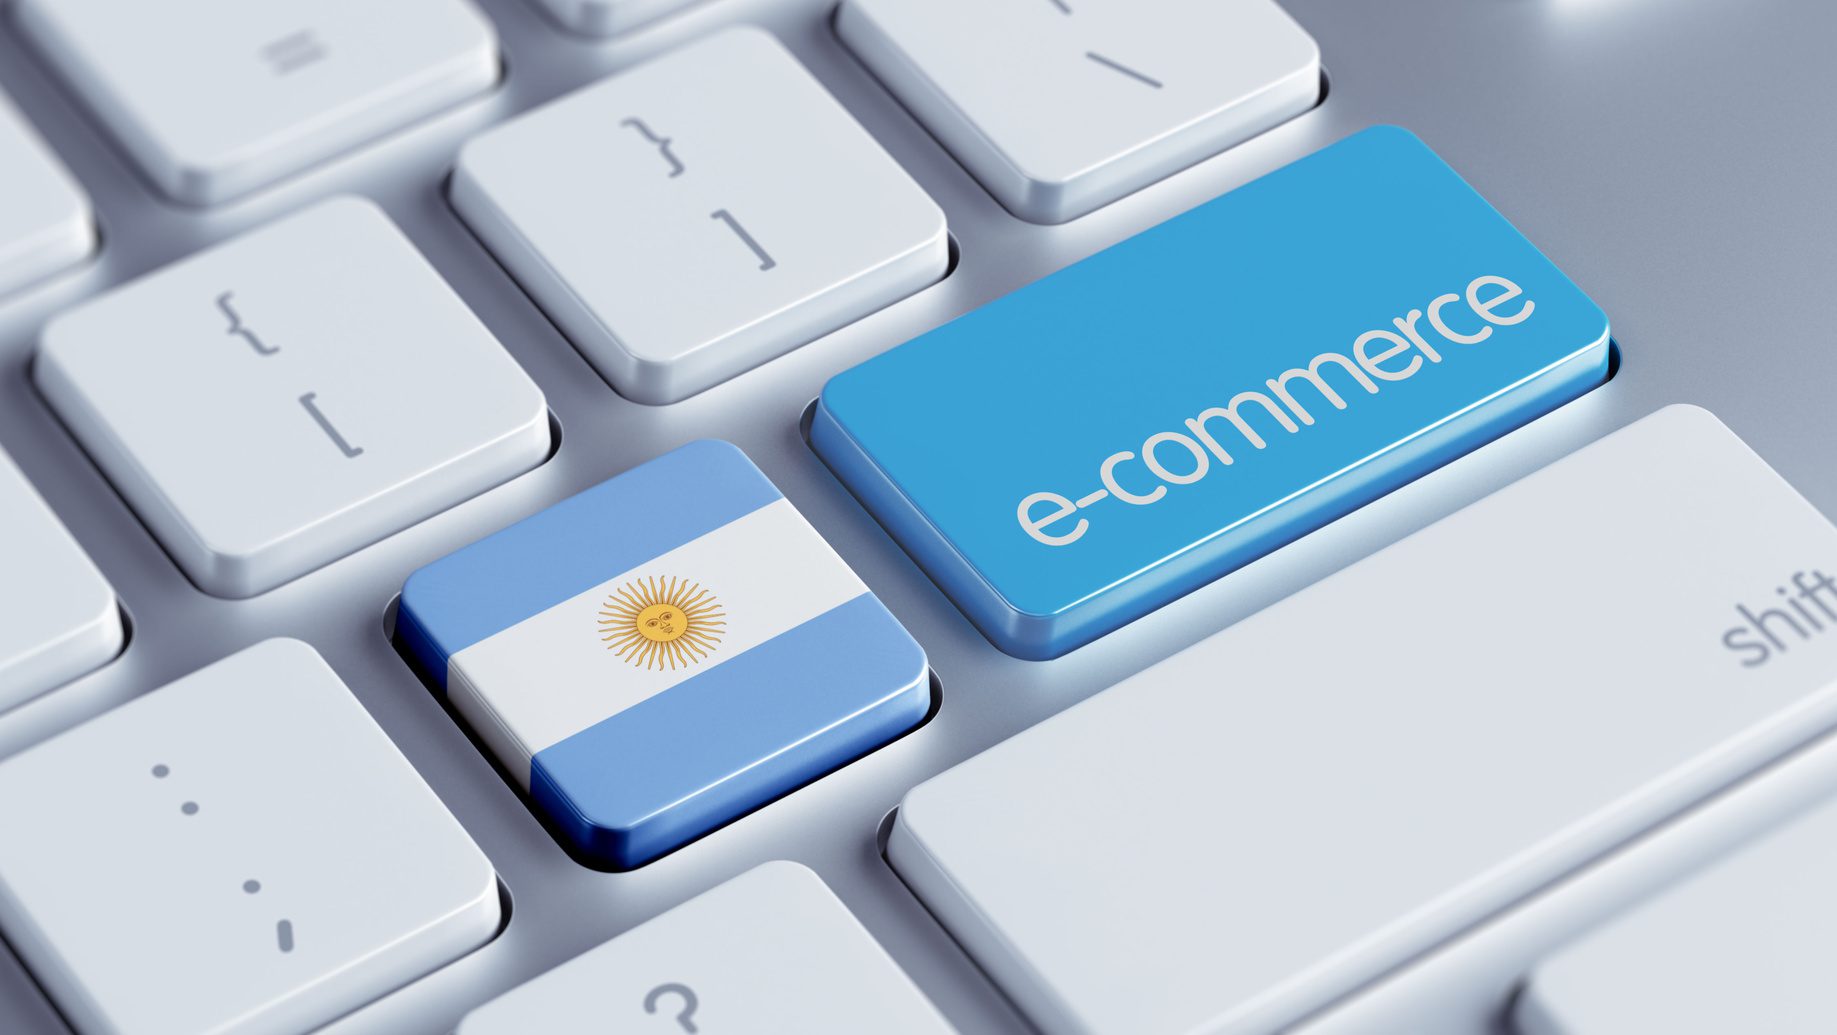 Argentina’s E-commerce Growing at an Explosive Rate, but Not without Challenges